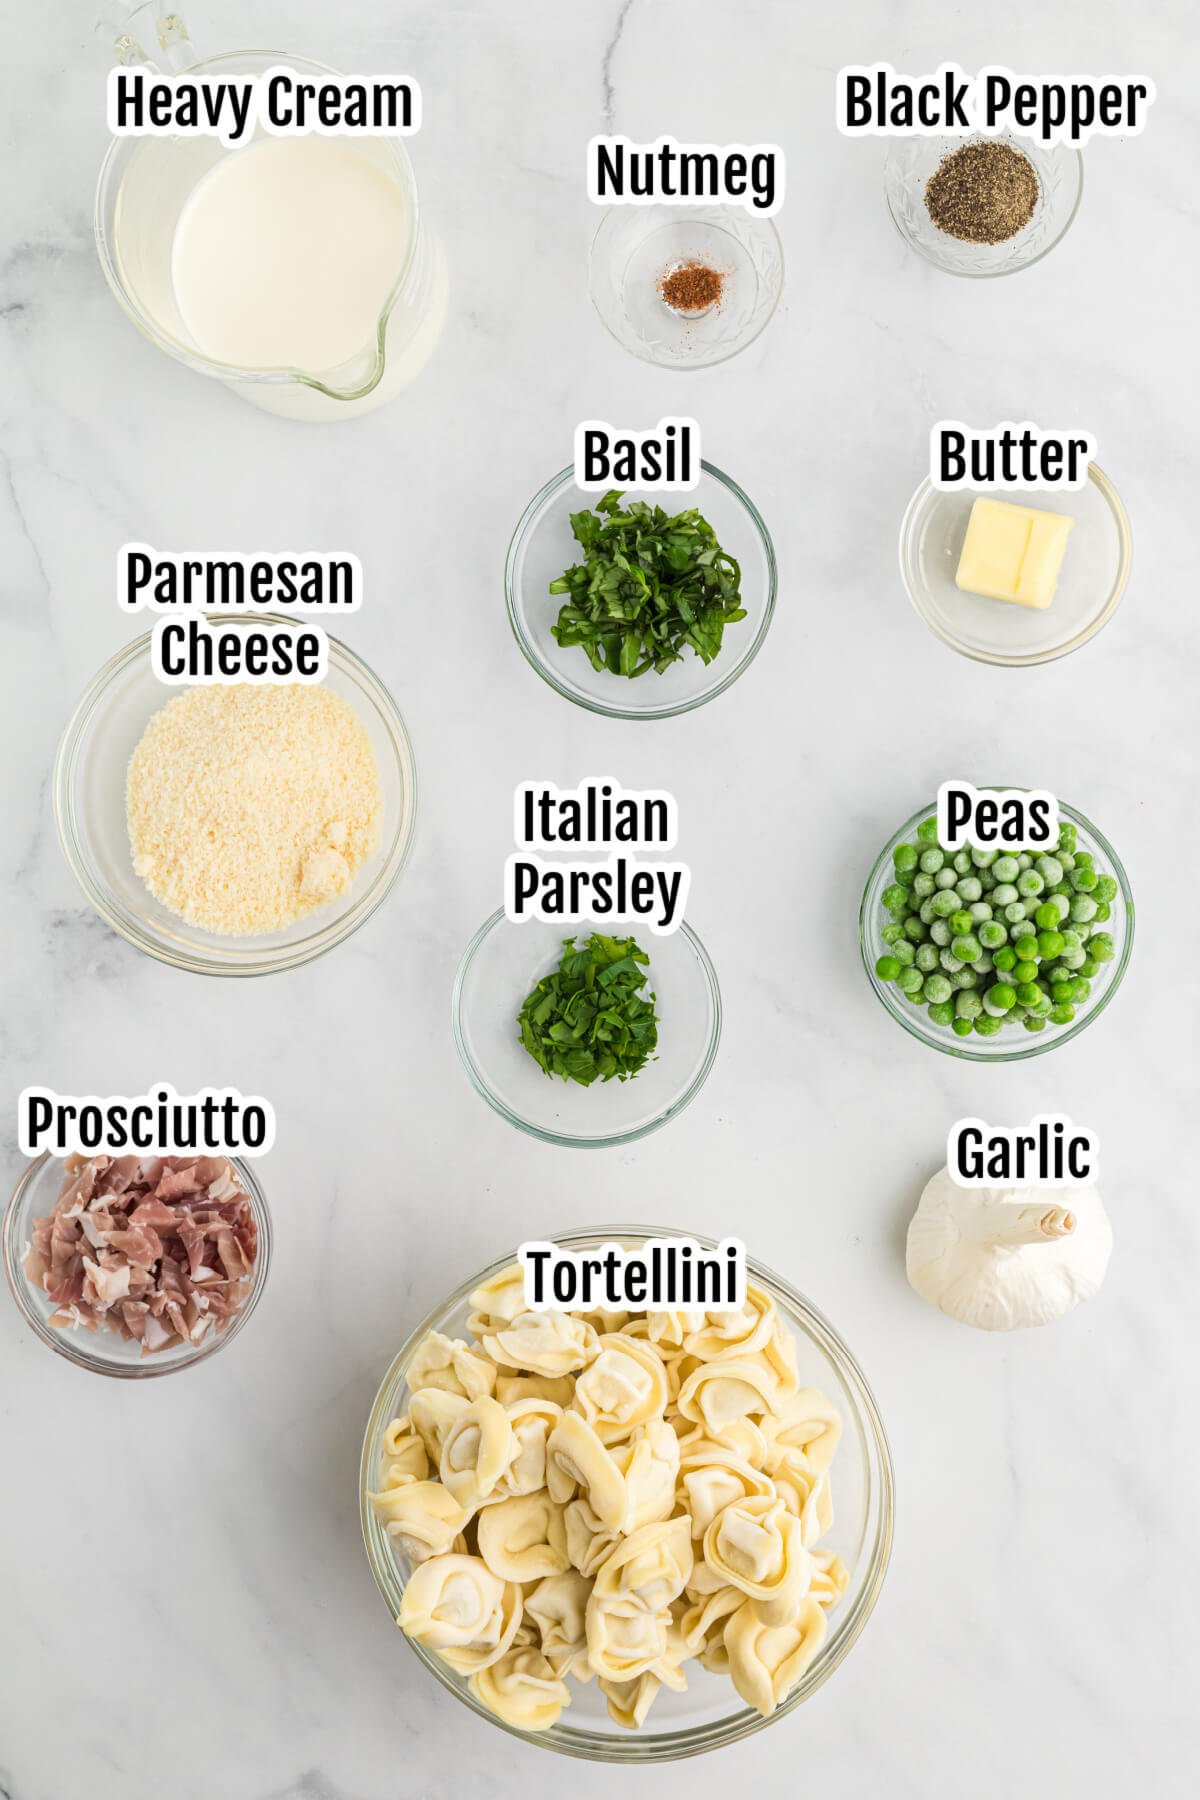 Image of the ingredients needed for making Tortellini alla Panna.